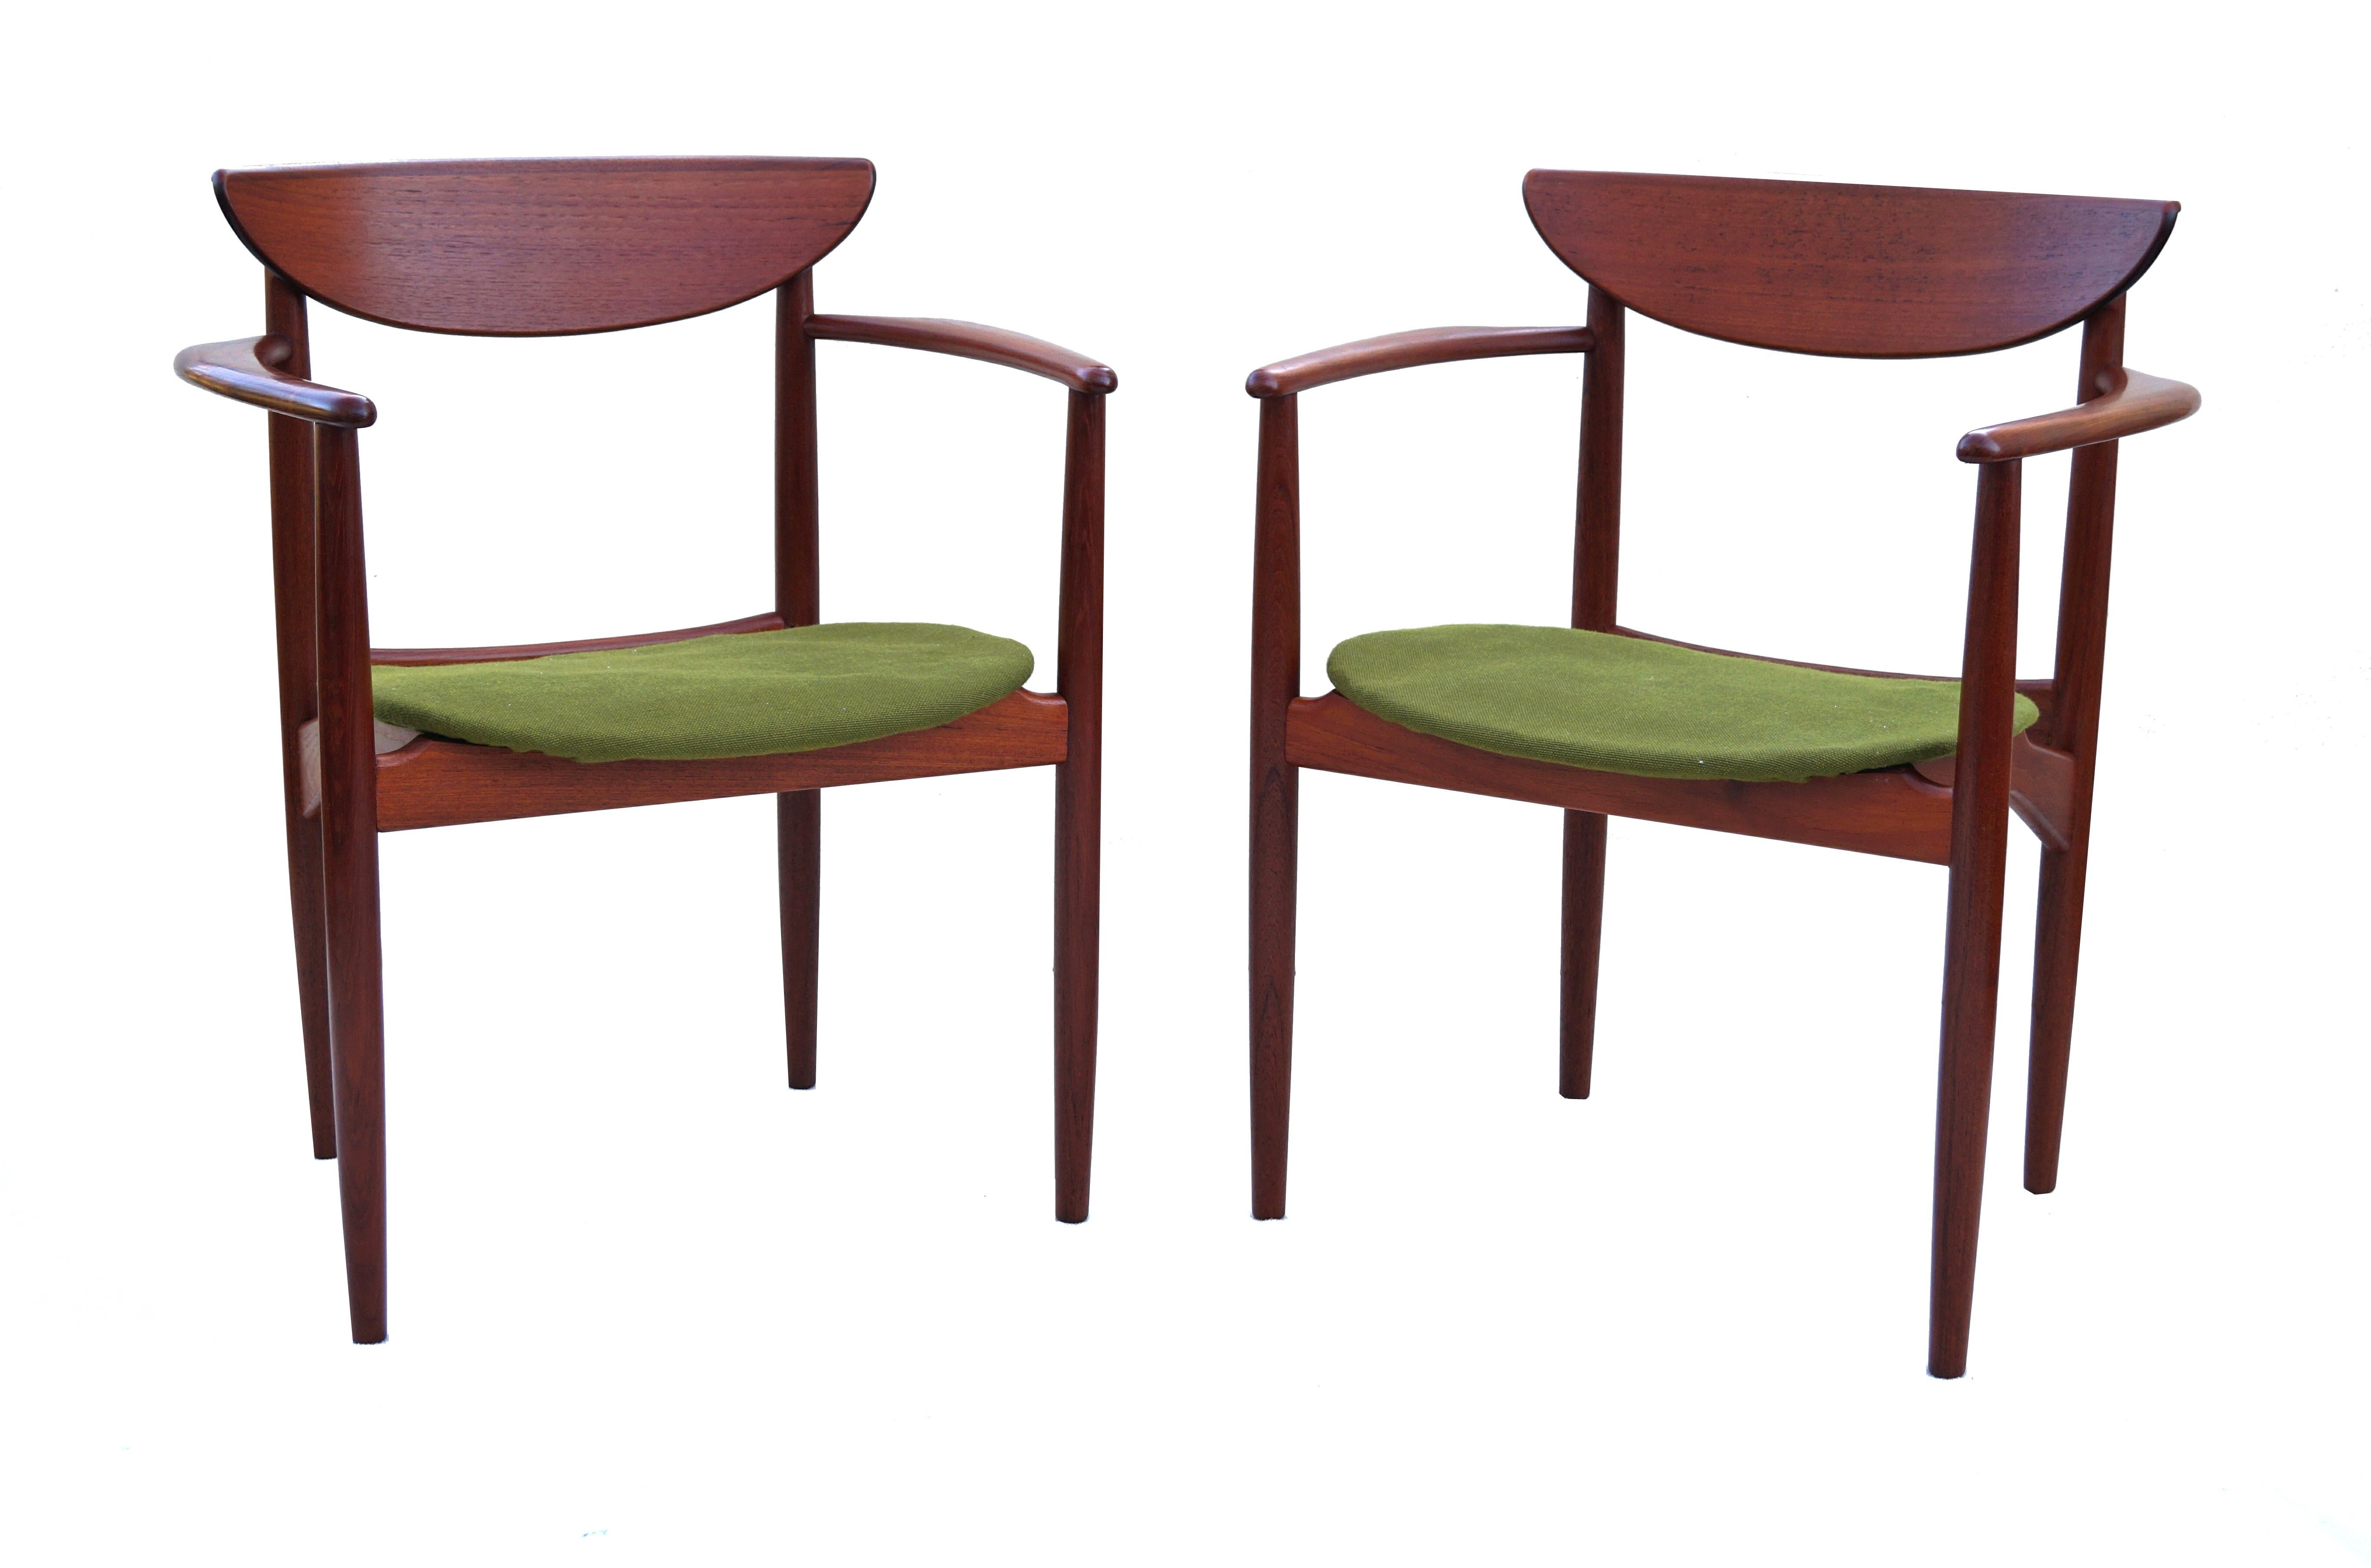 The price listed is for the pair. Pair of Teak Scandinavian Modern Sculptural Peter Hvidt Side Arm Lounge Chairs. Seats are matching in color, but taken in different lighting. Some glare to wood on photos.